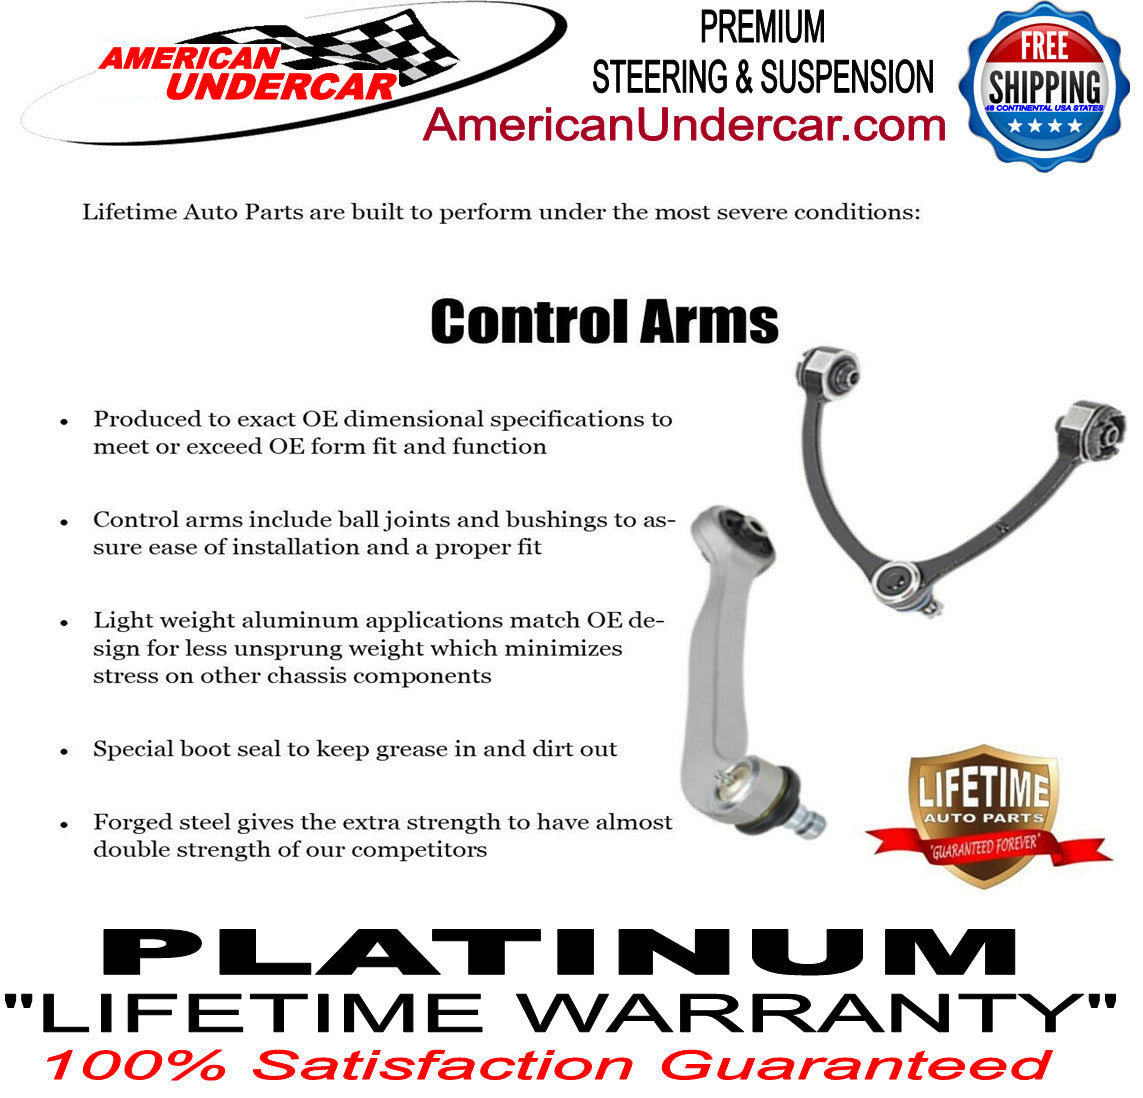 Lifetime Tie Rod Drag Link Sleeve Steering Kit for 2005-2007 Ford F250, F350 Super Duty 4x4